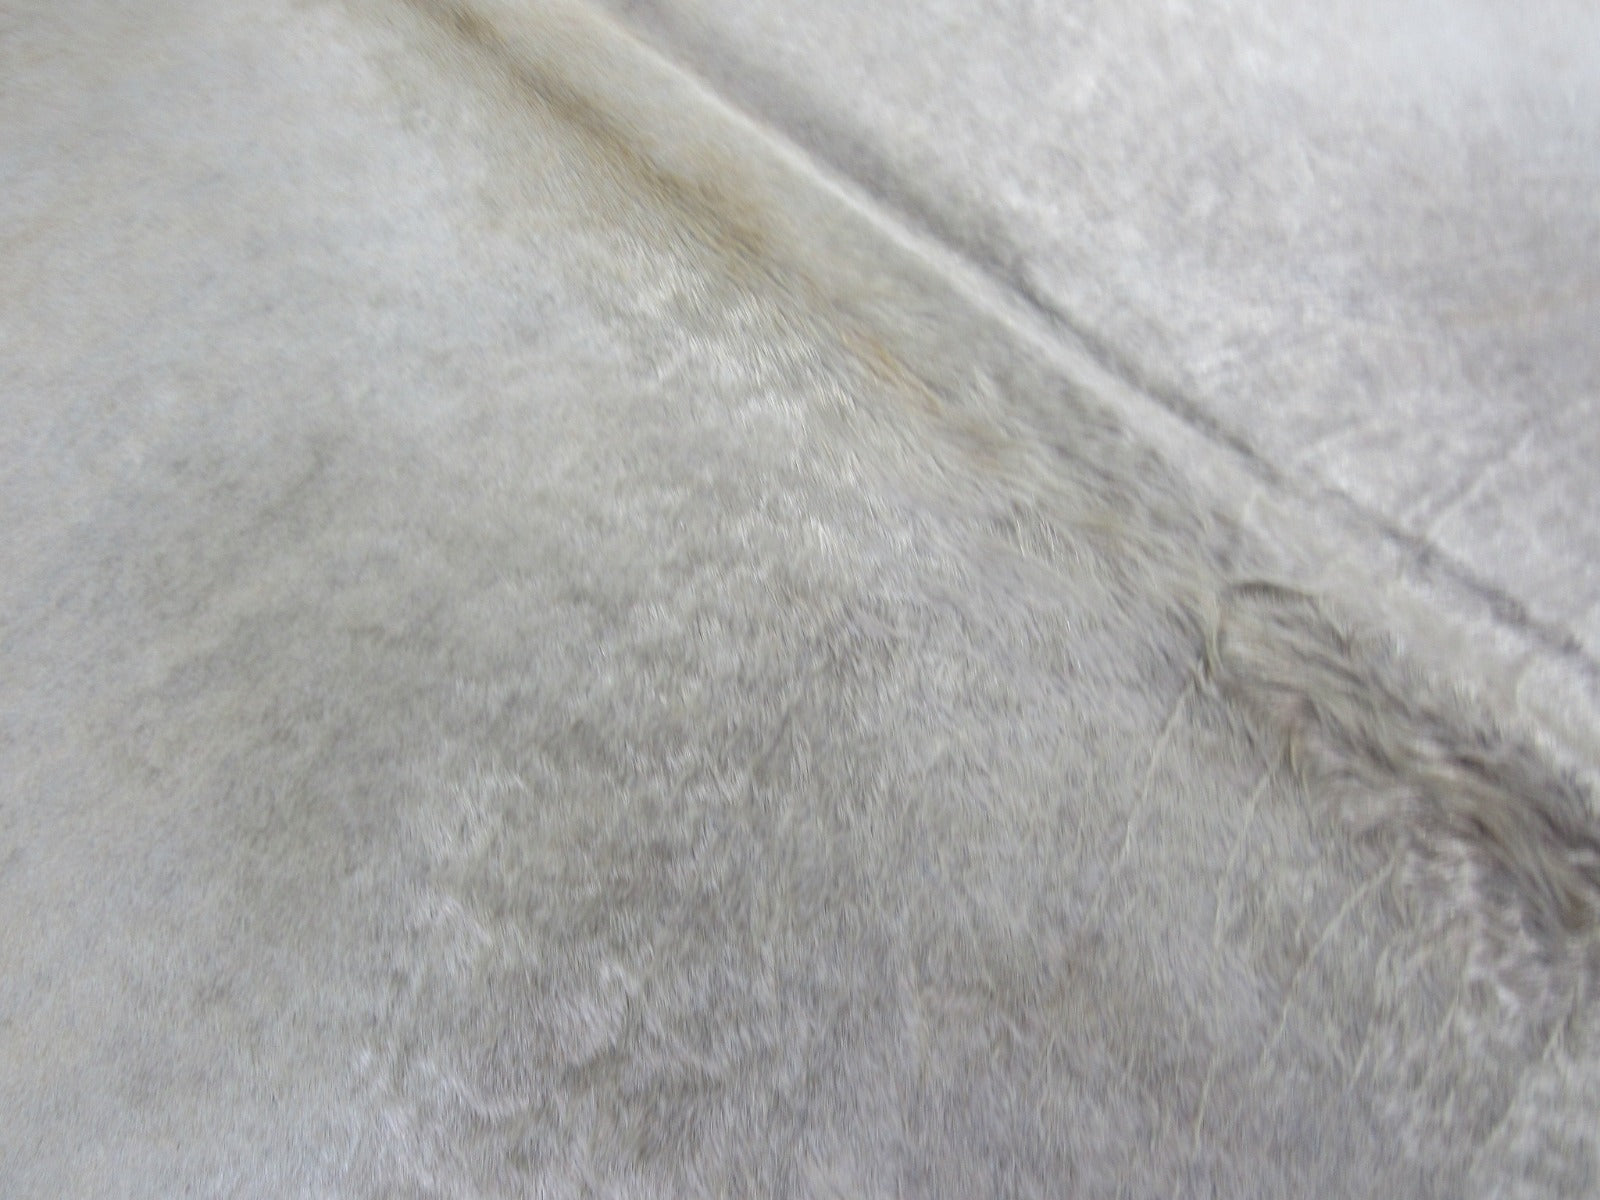 Palomino Cowhide Rug (shiny hair - Alpen/ Pearl Color) Size: 6.5x6 feet M-1172